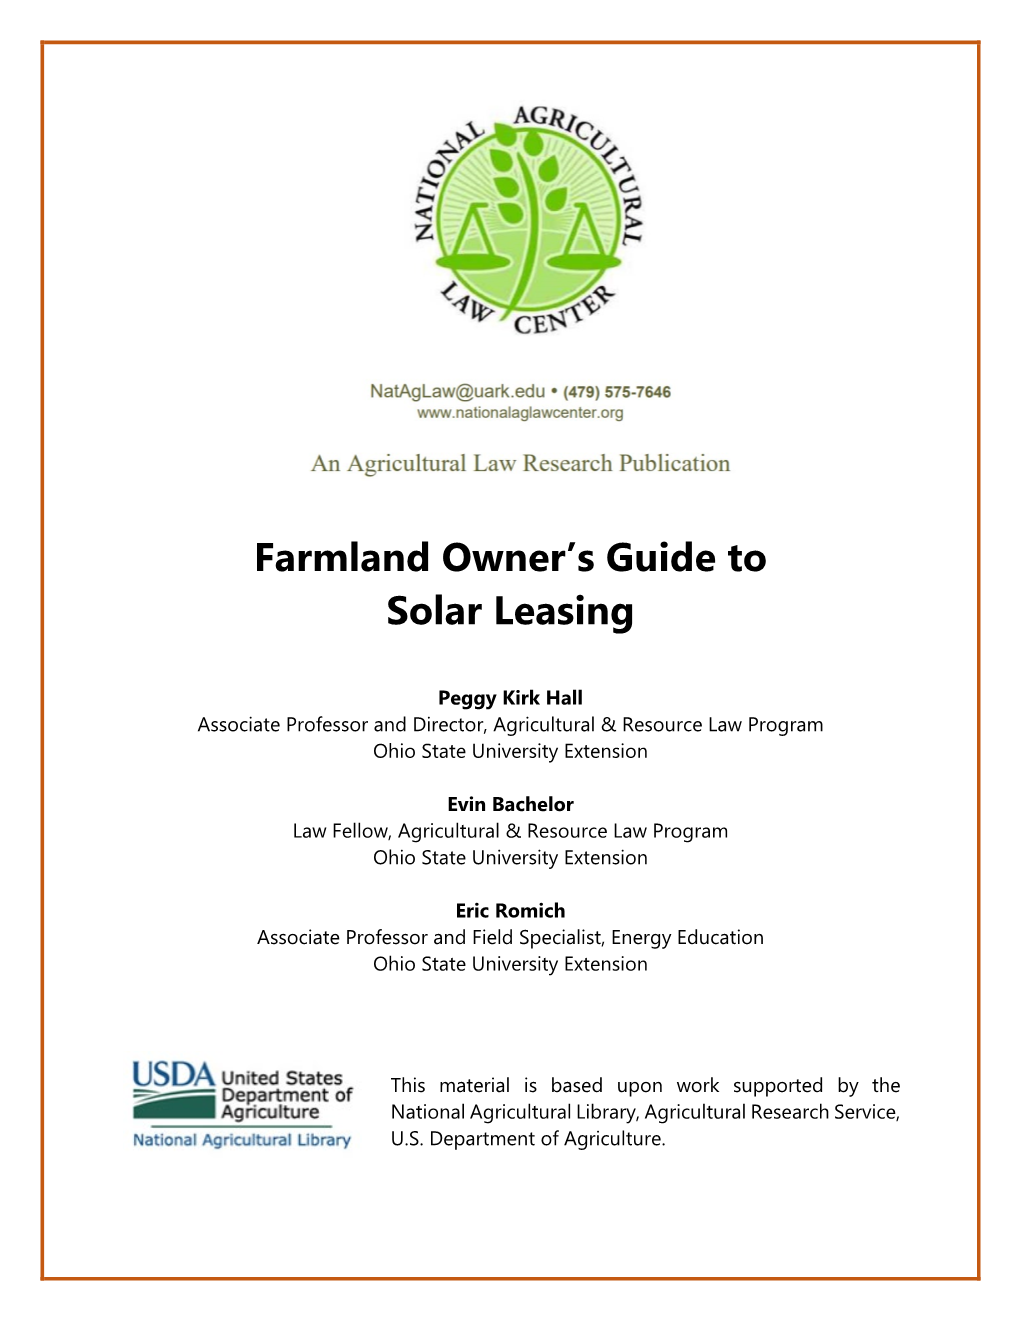 Farmland Owner's Guide to Solar Leasing